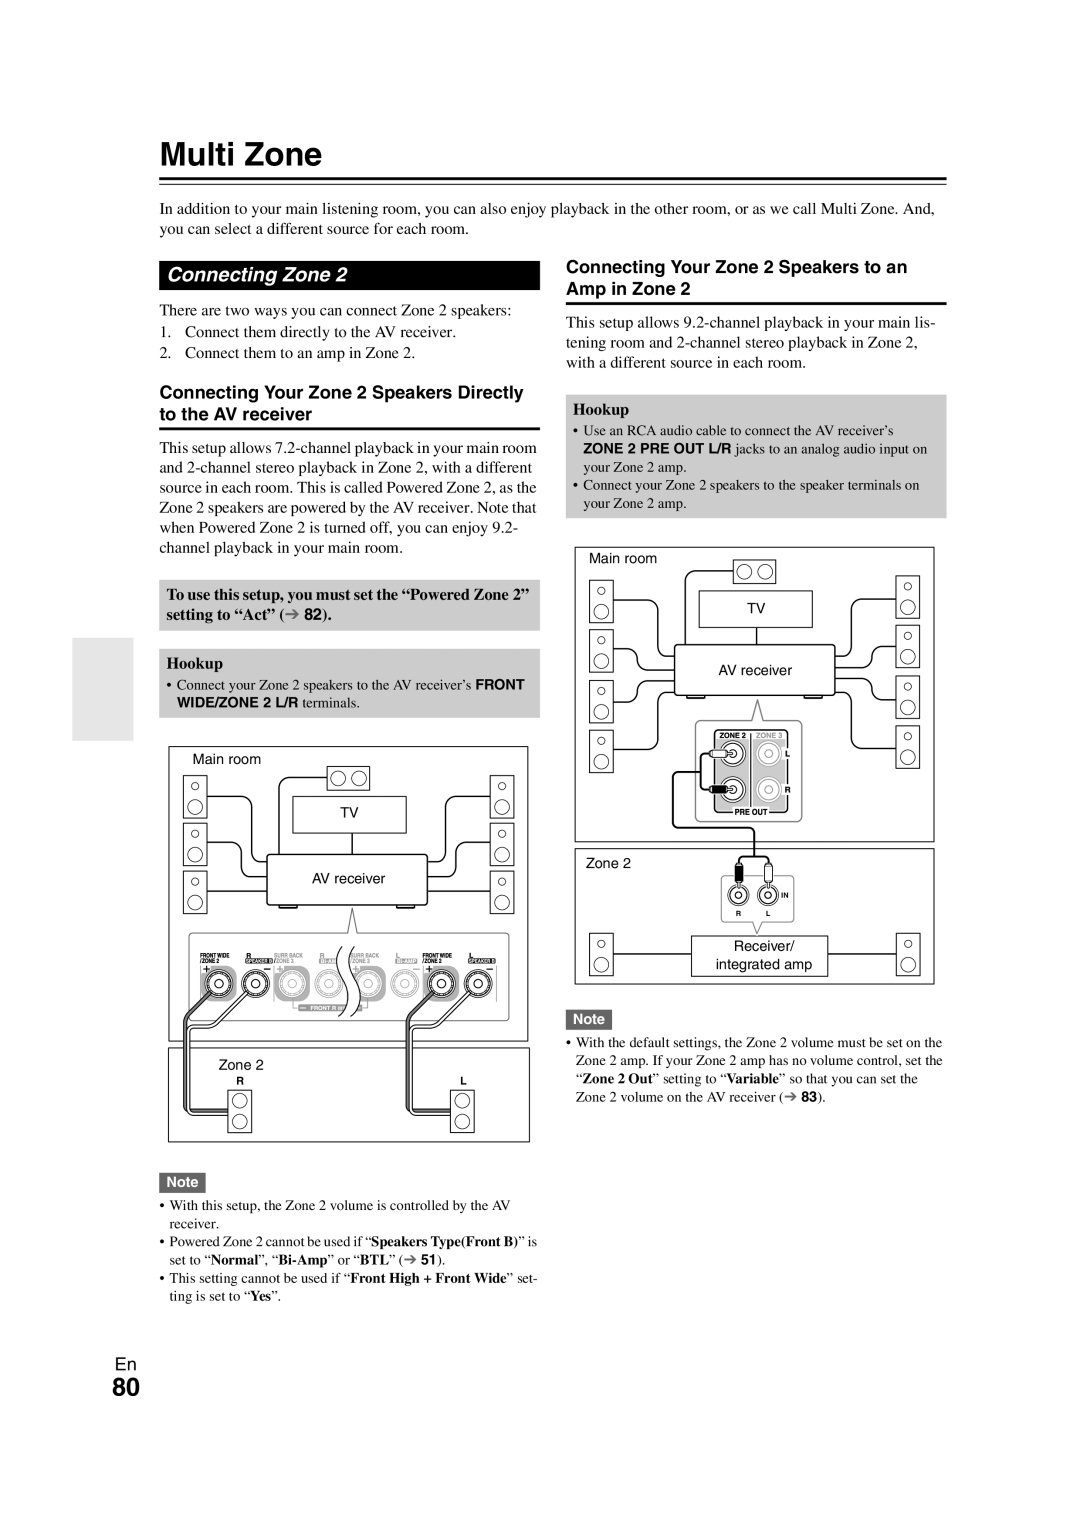 Onkyo TX-NR3008 instruction manual Multi Zone, Connecting Zone, Connecting Your Zone 2 Speakers to an Amp in Zone 